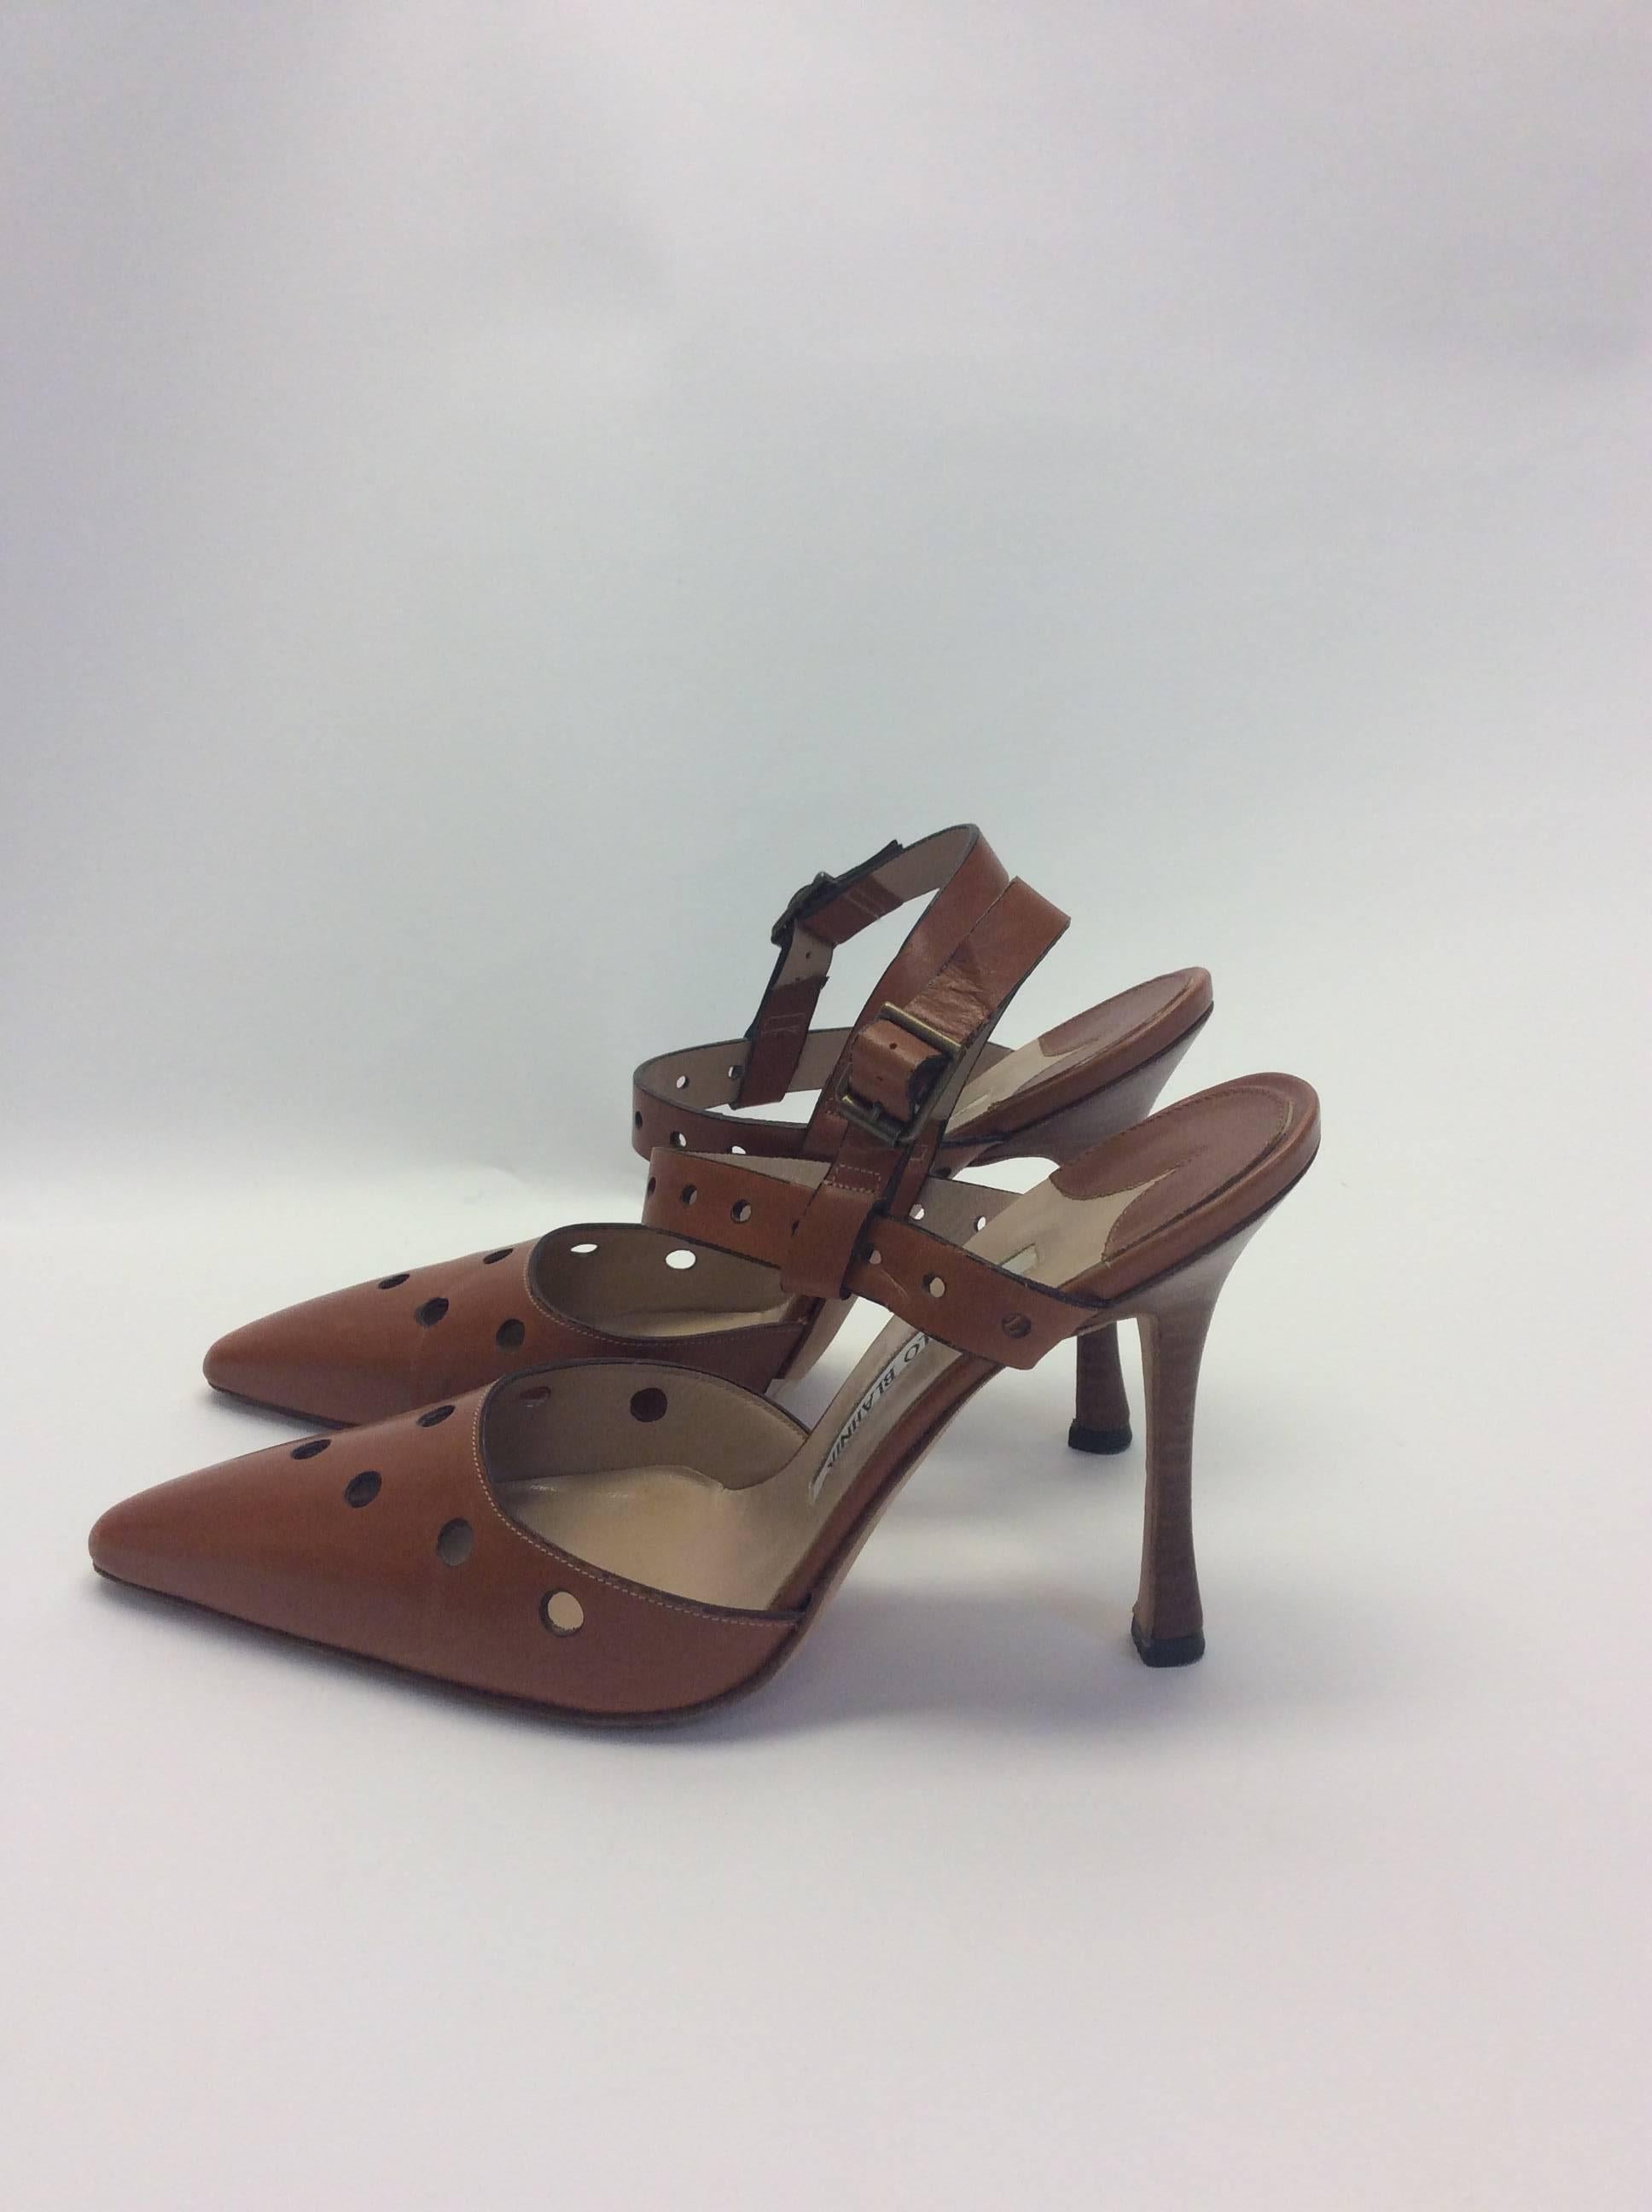 Manolo Blahnik Brown Leather Heels With Cutouts
Size 36
With box, original price $445
4 inch heel
Made in Italy
Circle cut out detailing in leather
